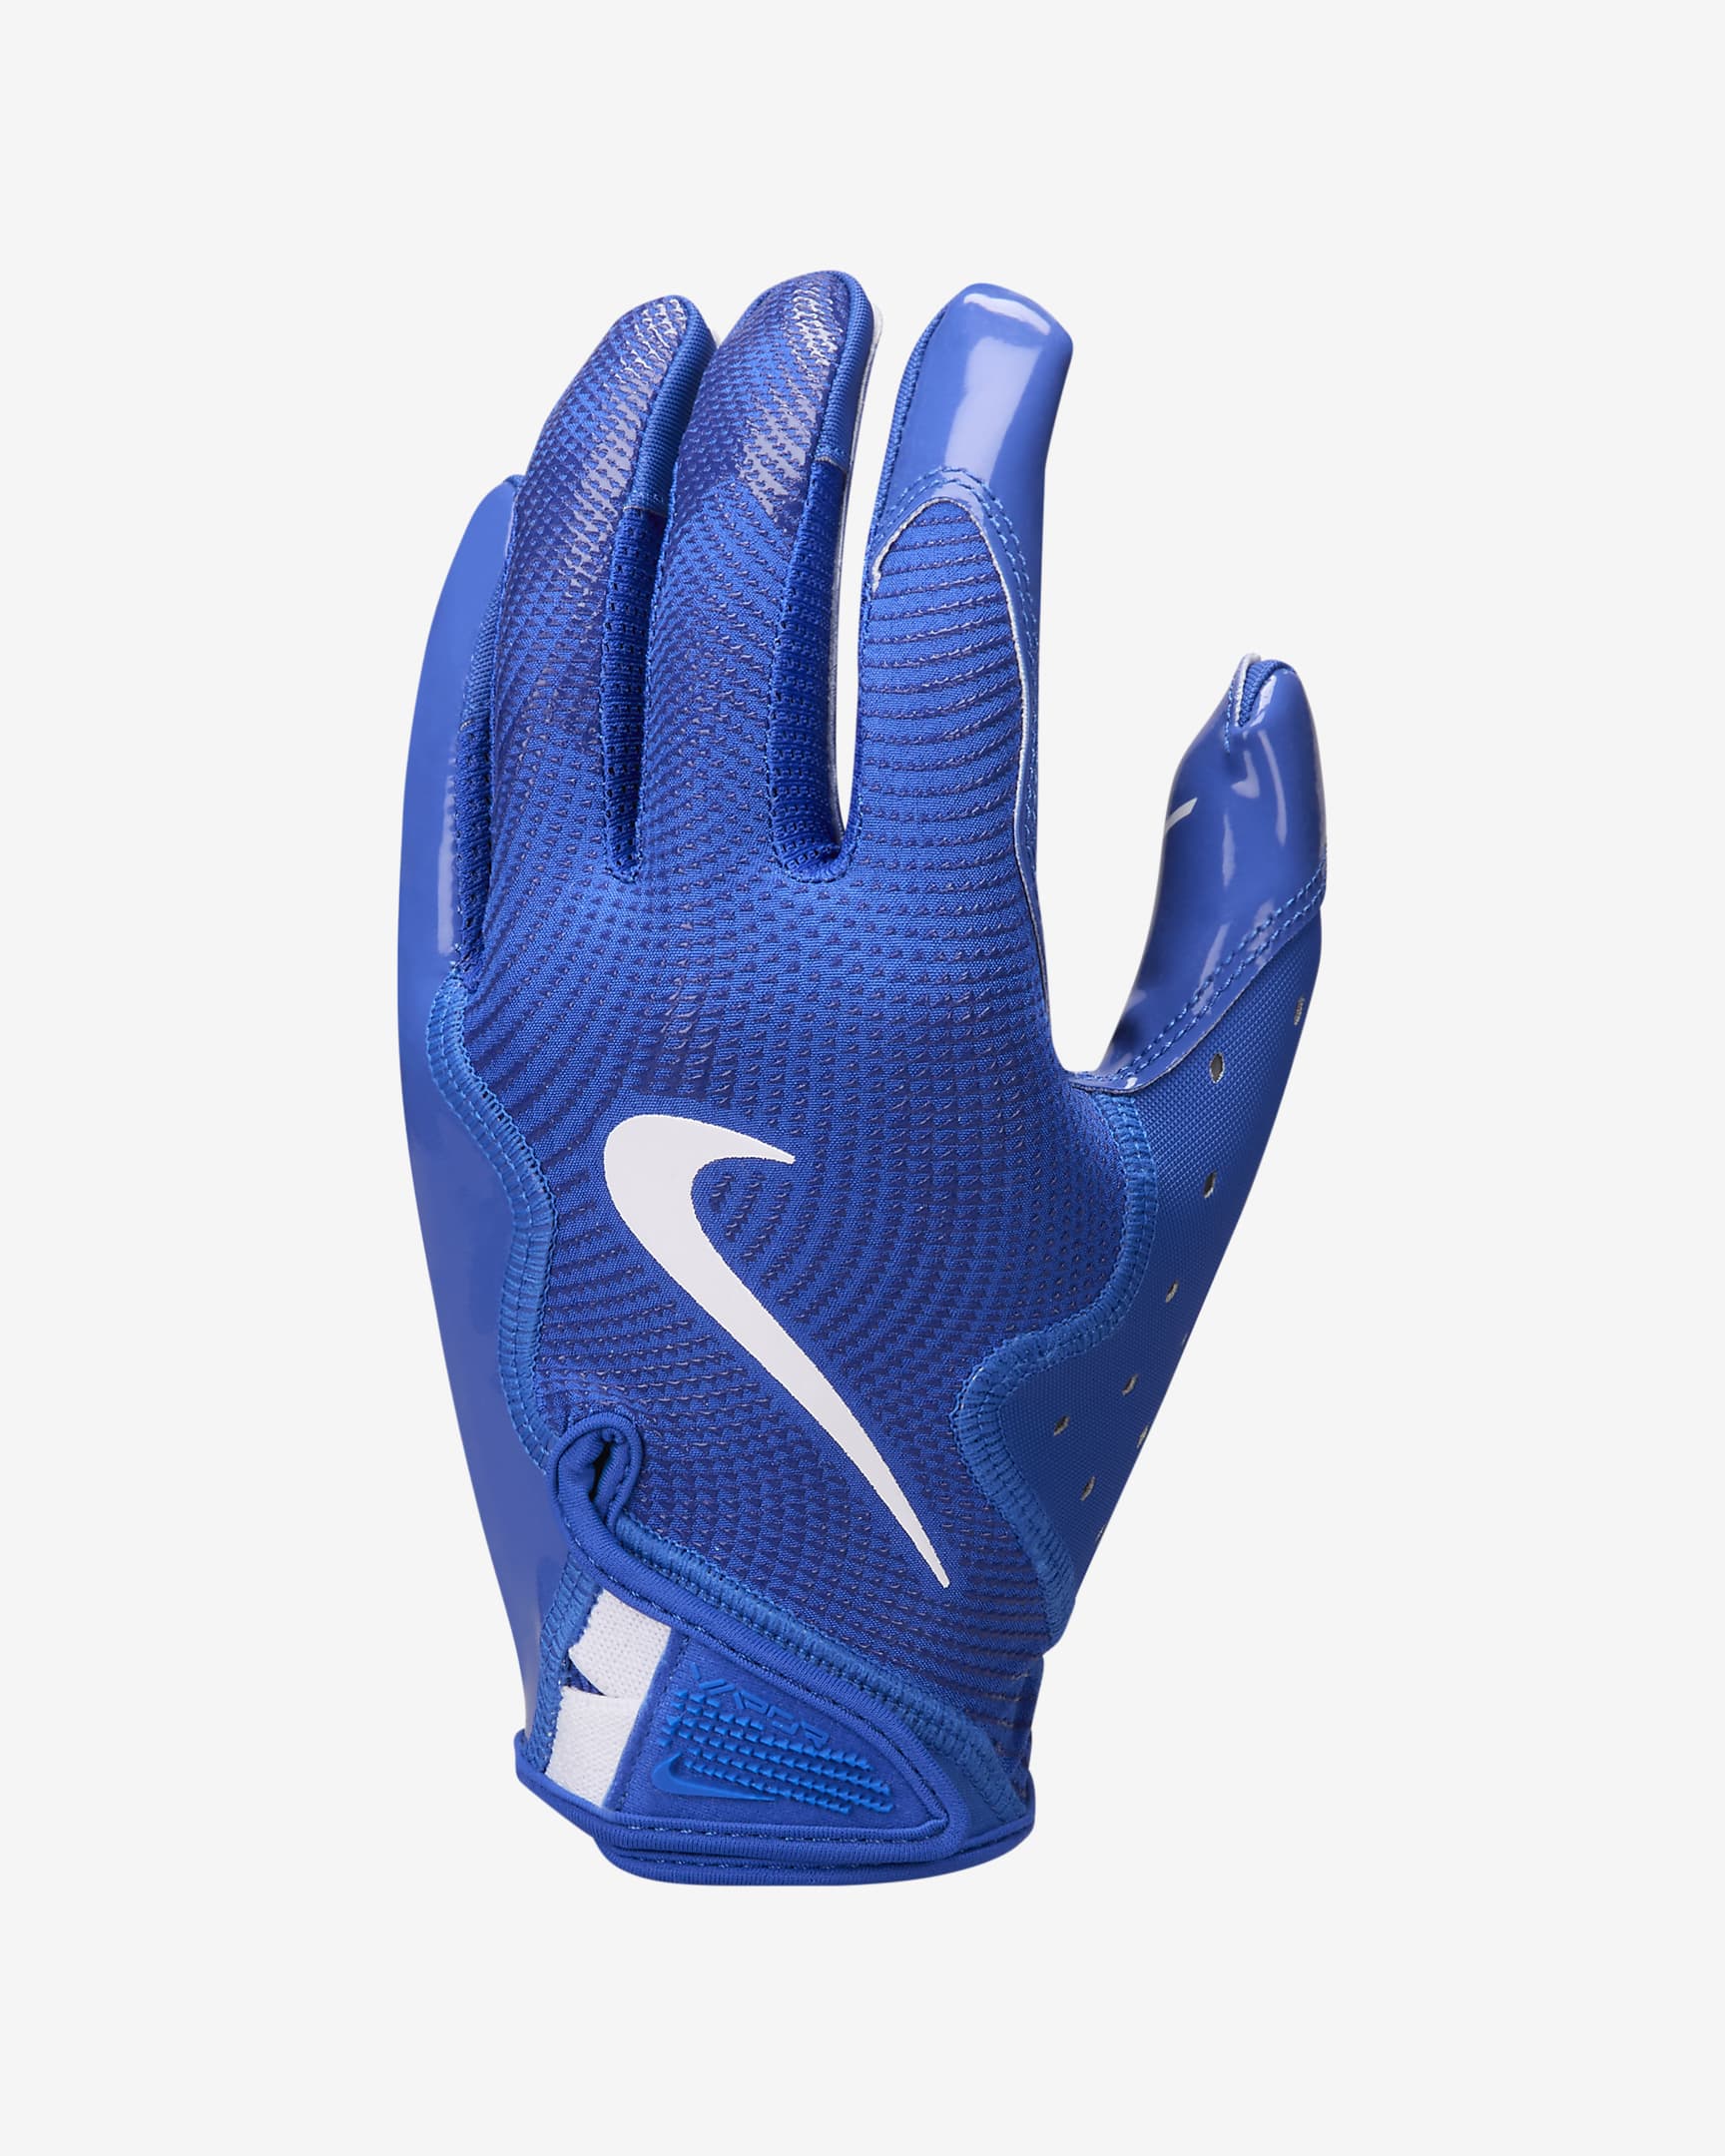 A photo of the Nike Vapor Jet 8.0 Football Gloves in colour blue with white nike check